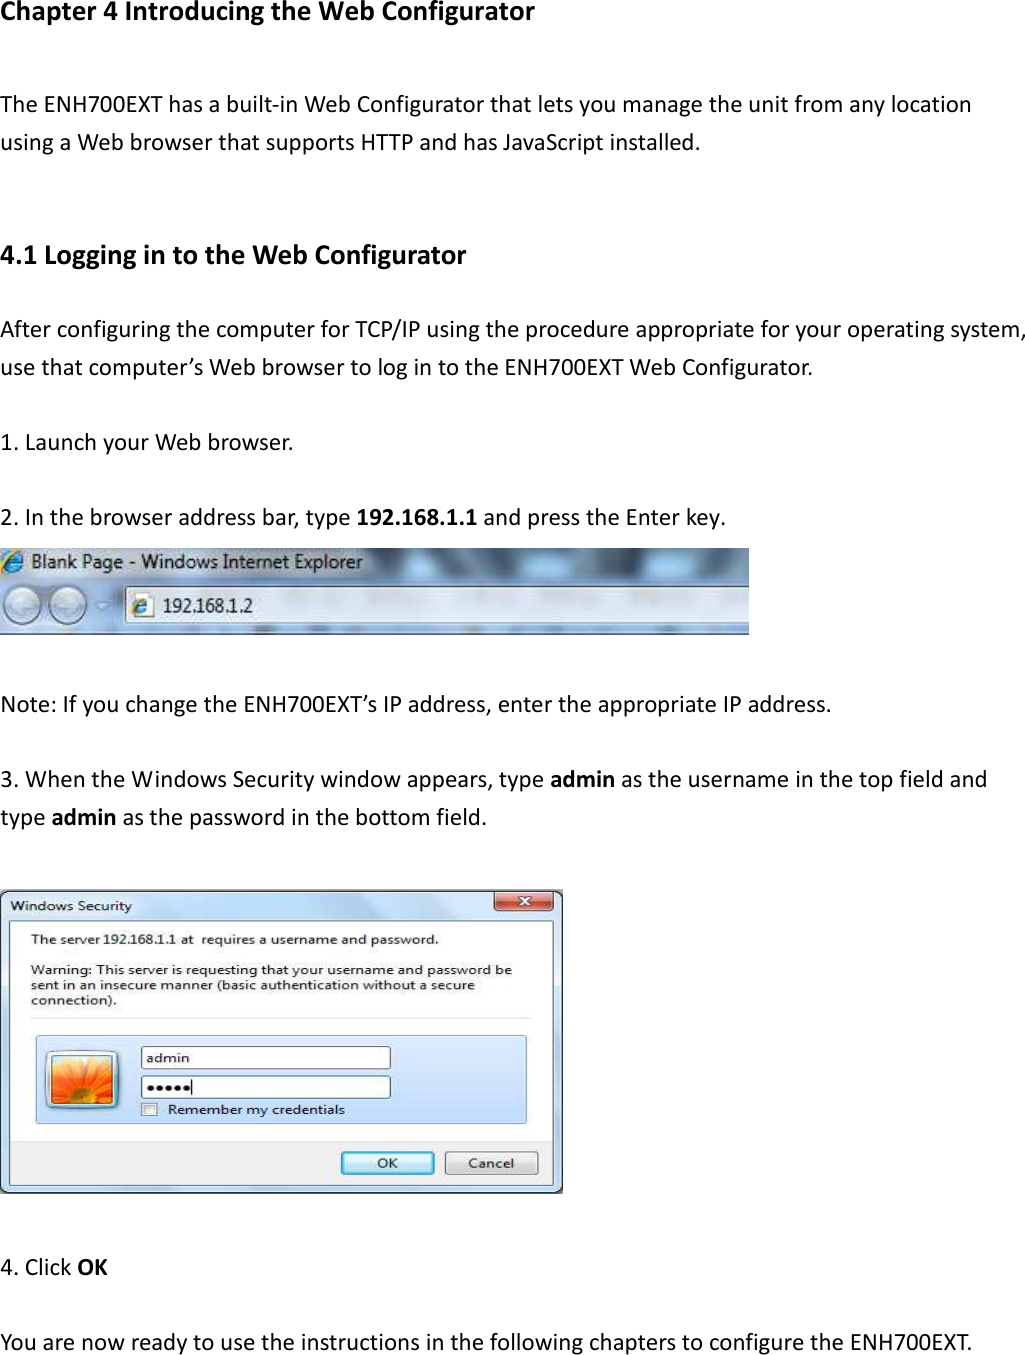 Chapter 4 Introducing the Web Configurator The ENH700EXT has a built-in Web Configurator that lets you manage the unit from any location using a Web browser that supports HTTP and has JavaScript installed.  4.1 Logging in to the Web Configurator After configuring the computer for TCP/IP using the procedure appropriate for your operating system, use that computer’s Web browser to log in to the ENH700EXT Web Configurator.  1. Launch your Web browser.  2. In the browser address bar, type 192.168.1.1 and press the Enter key.   Note: If you change the ENH700EXT’s IP address, enter the appropriate IP address.  3. When the Windows Security window appears, type admin as the username in the top field and type admin as the password in the bottom field.    4. Click OK    You are now ready to use the instructions in the following chapters to configure the ENH700EXT. 